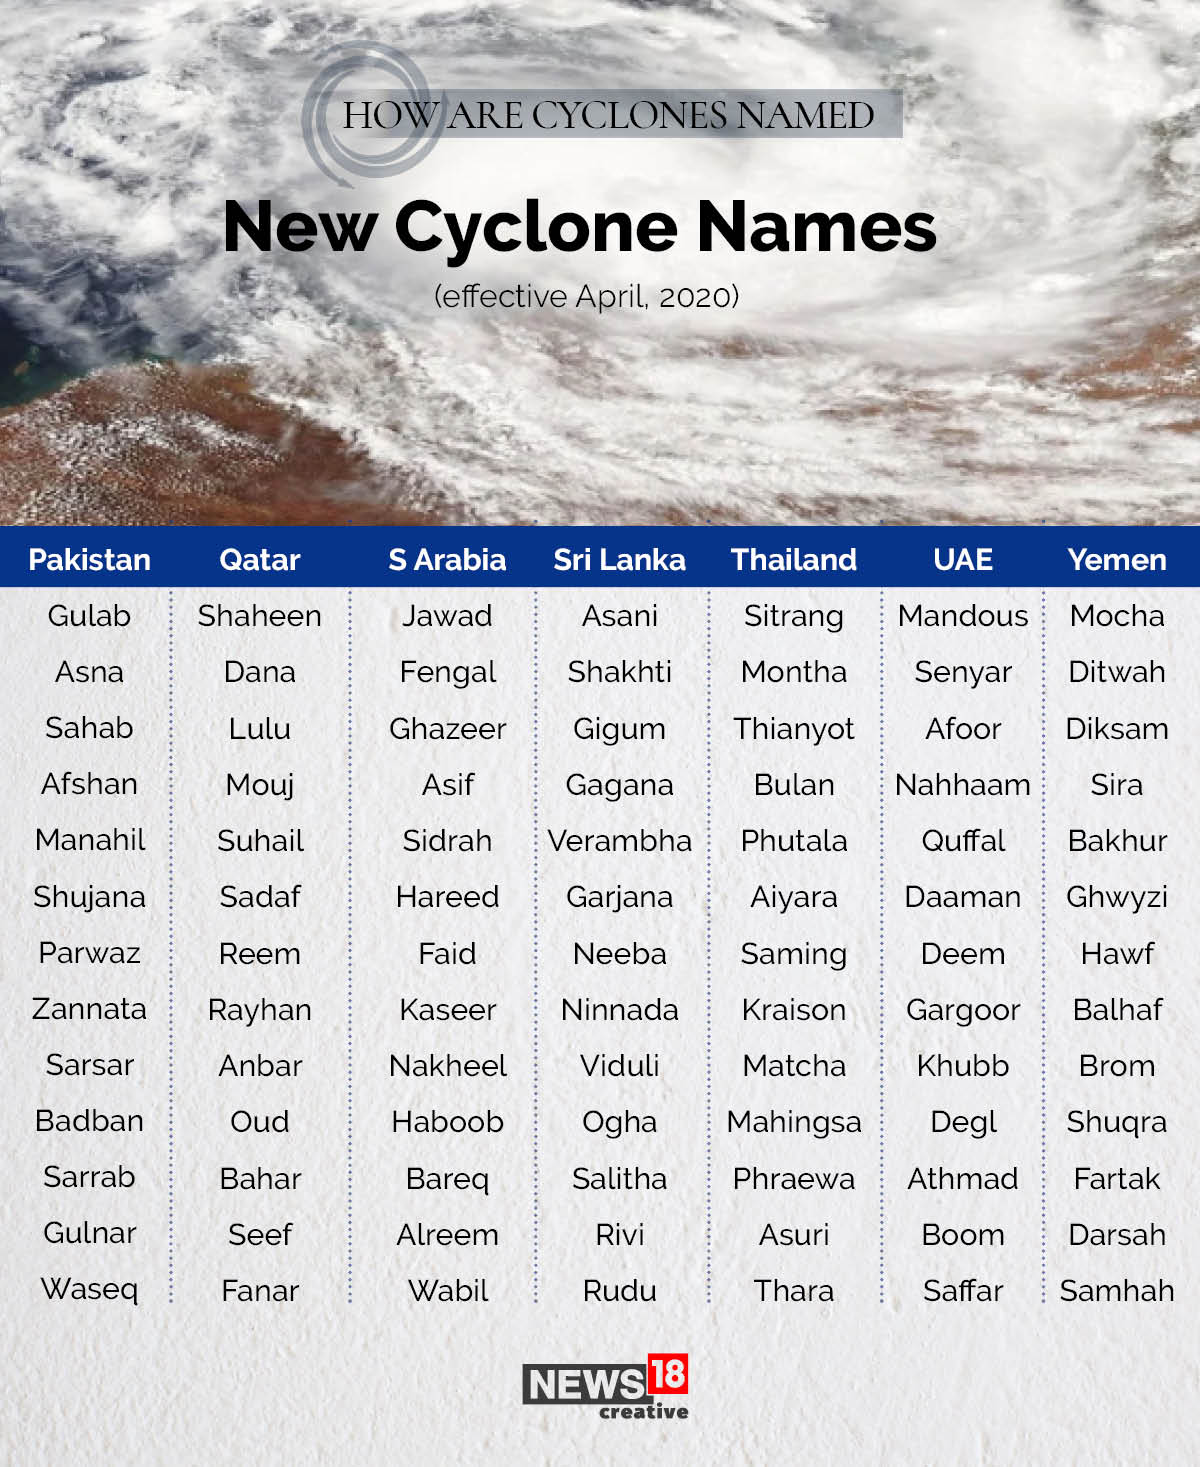 Why Tauktae? A look at how cyclones are named